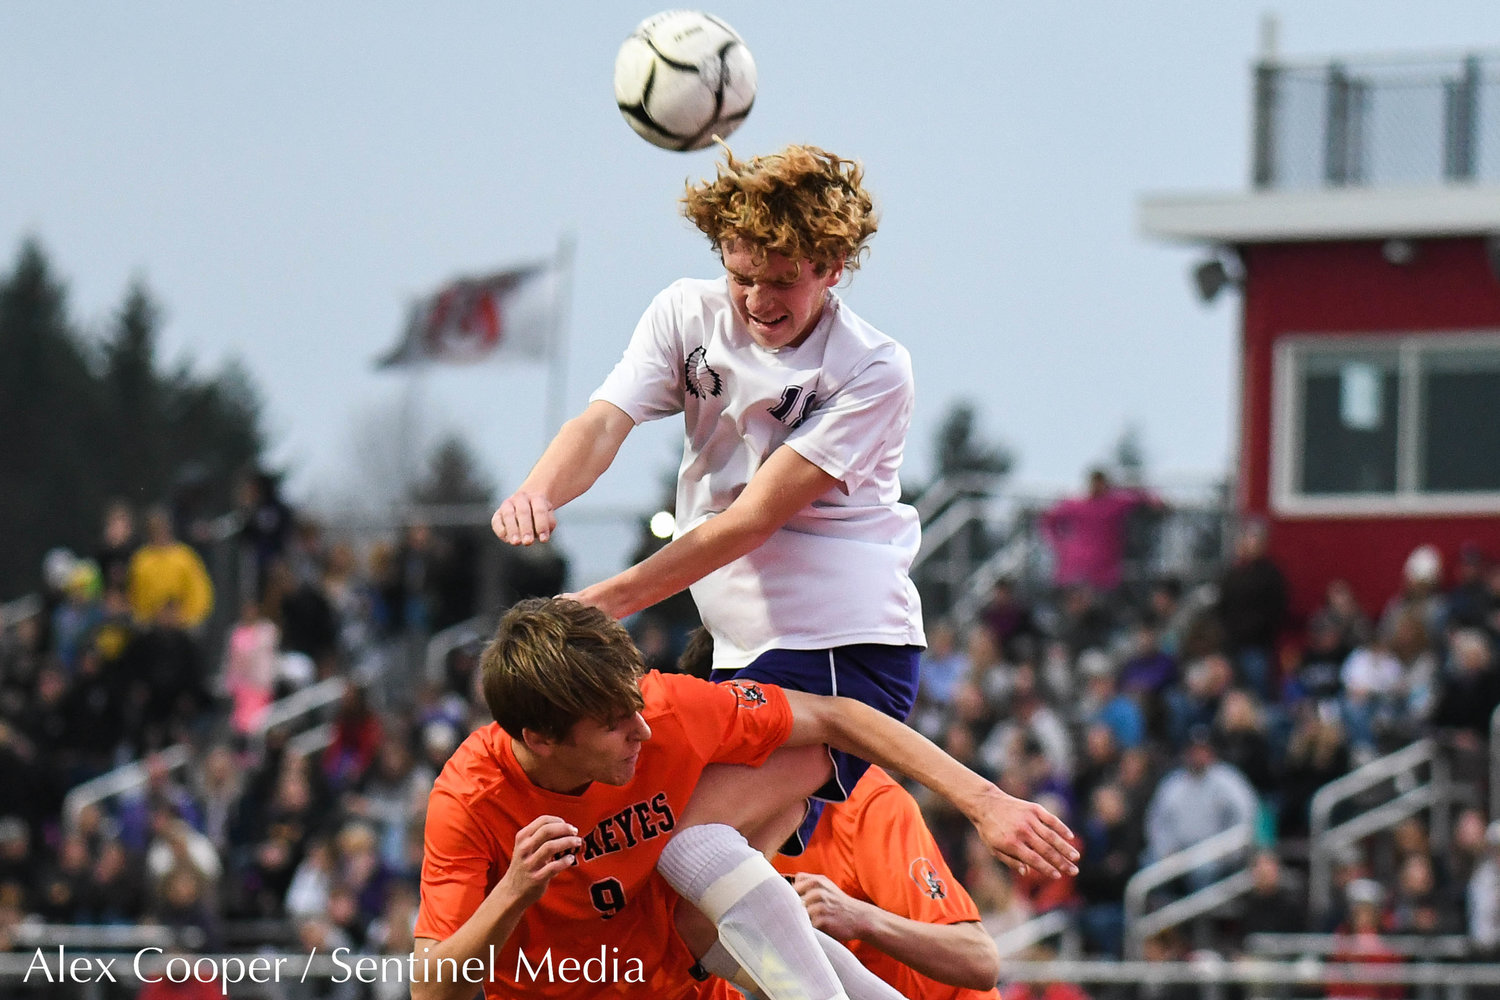 Waterville player Logan Baker (18) heads the ball on top of Cooperstown player Oliver Wasson (9) during the Section III Class C final on Tuesday, Nov. 1 at VVS High School. Cooperstown won 1-0 in overtime.